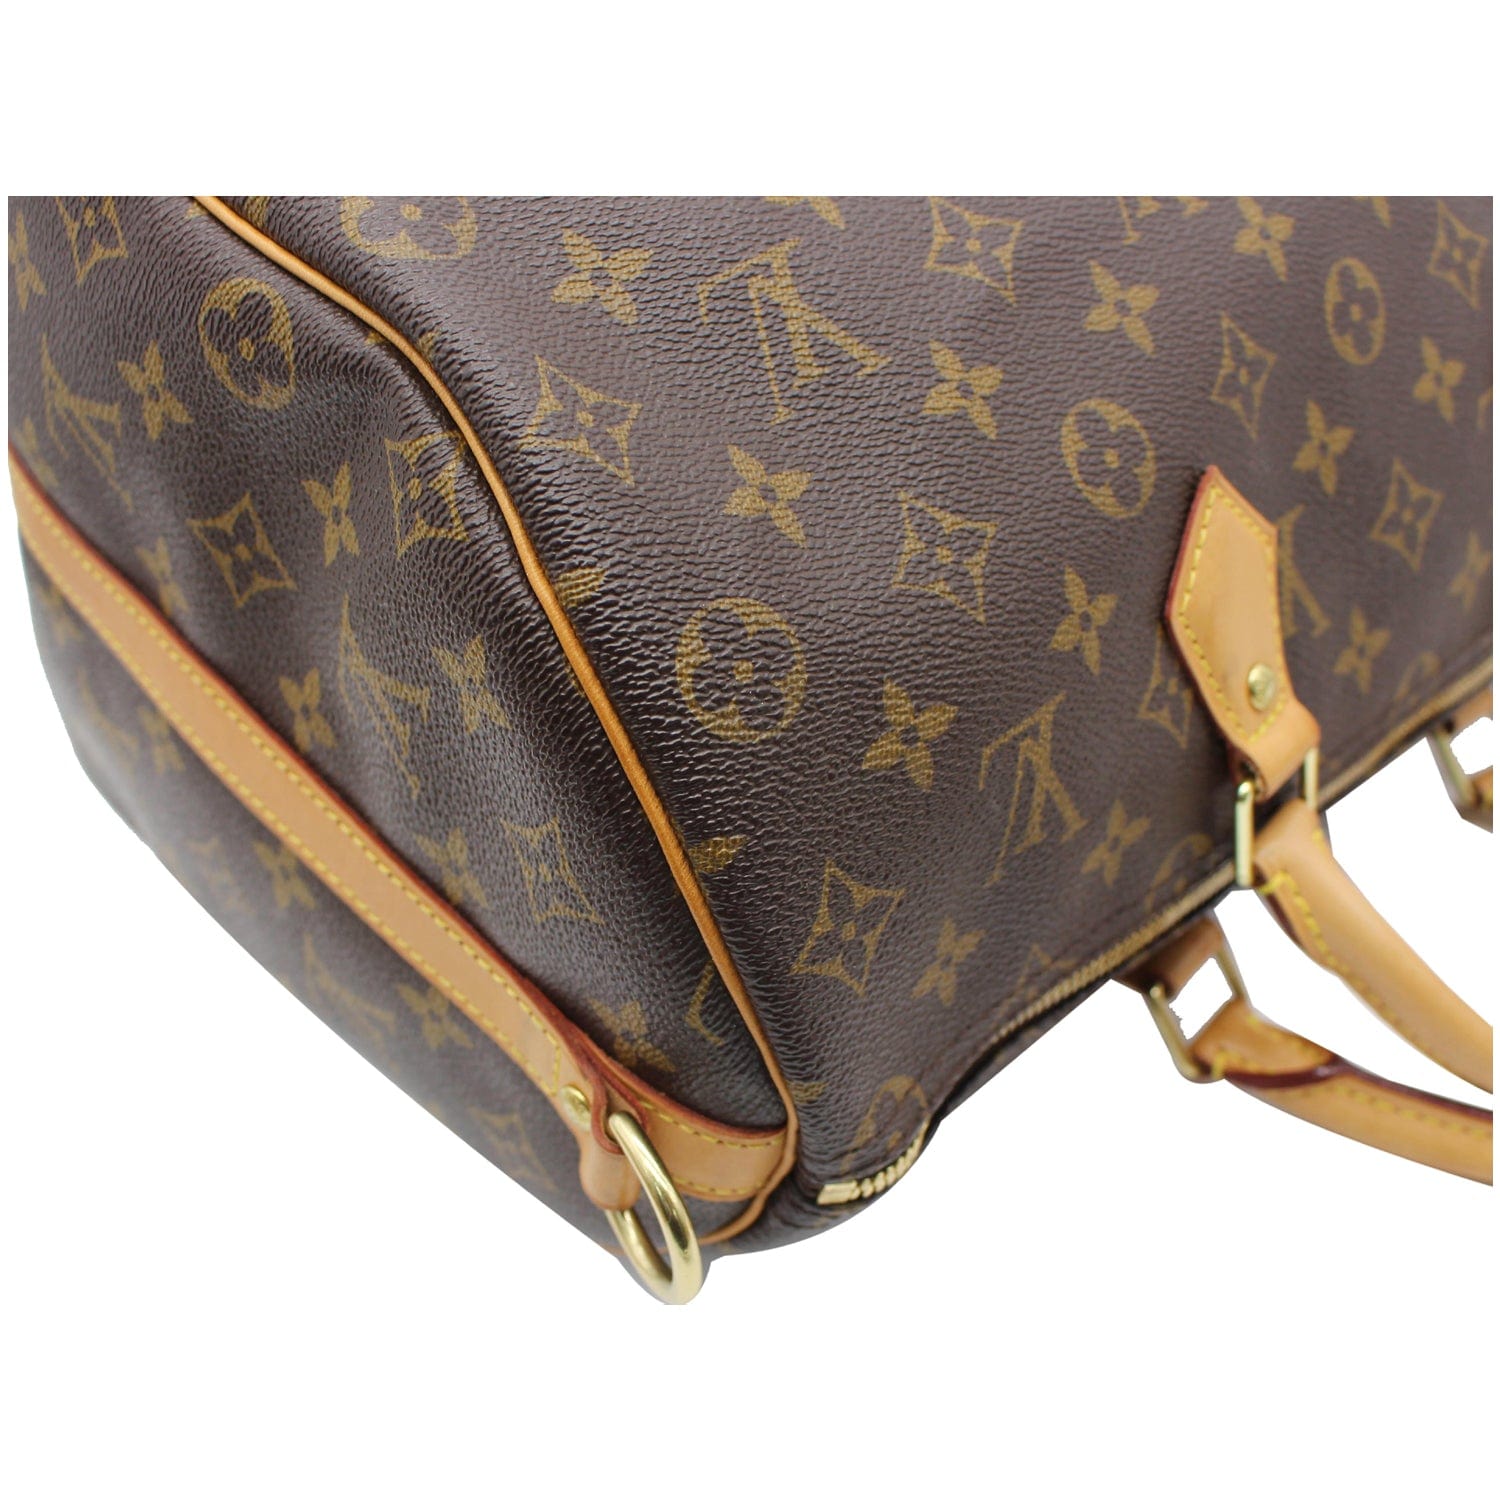 LOUIS VUITTON, Speedy 35, handbag, monogram pattern with cognac colored  leather details, lined with brown textile, one small compartment inside,  attached lock, marked with date code (France 2008). Vintage clothing &  Accessories 